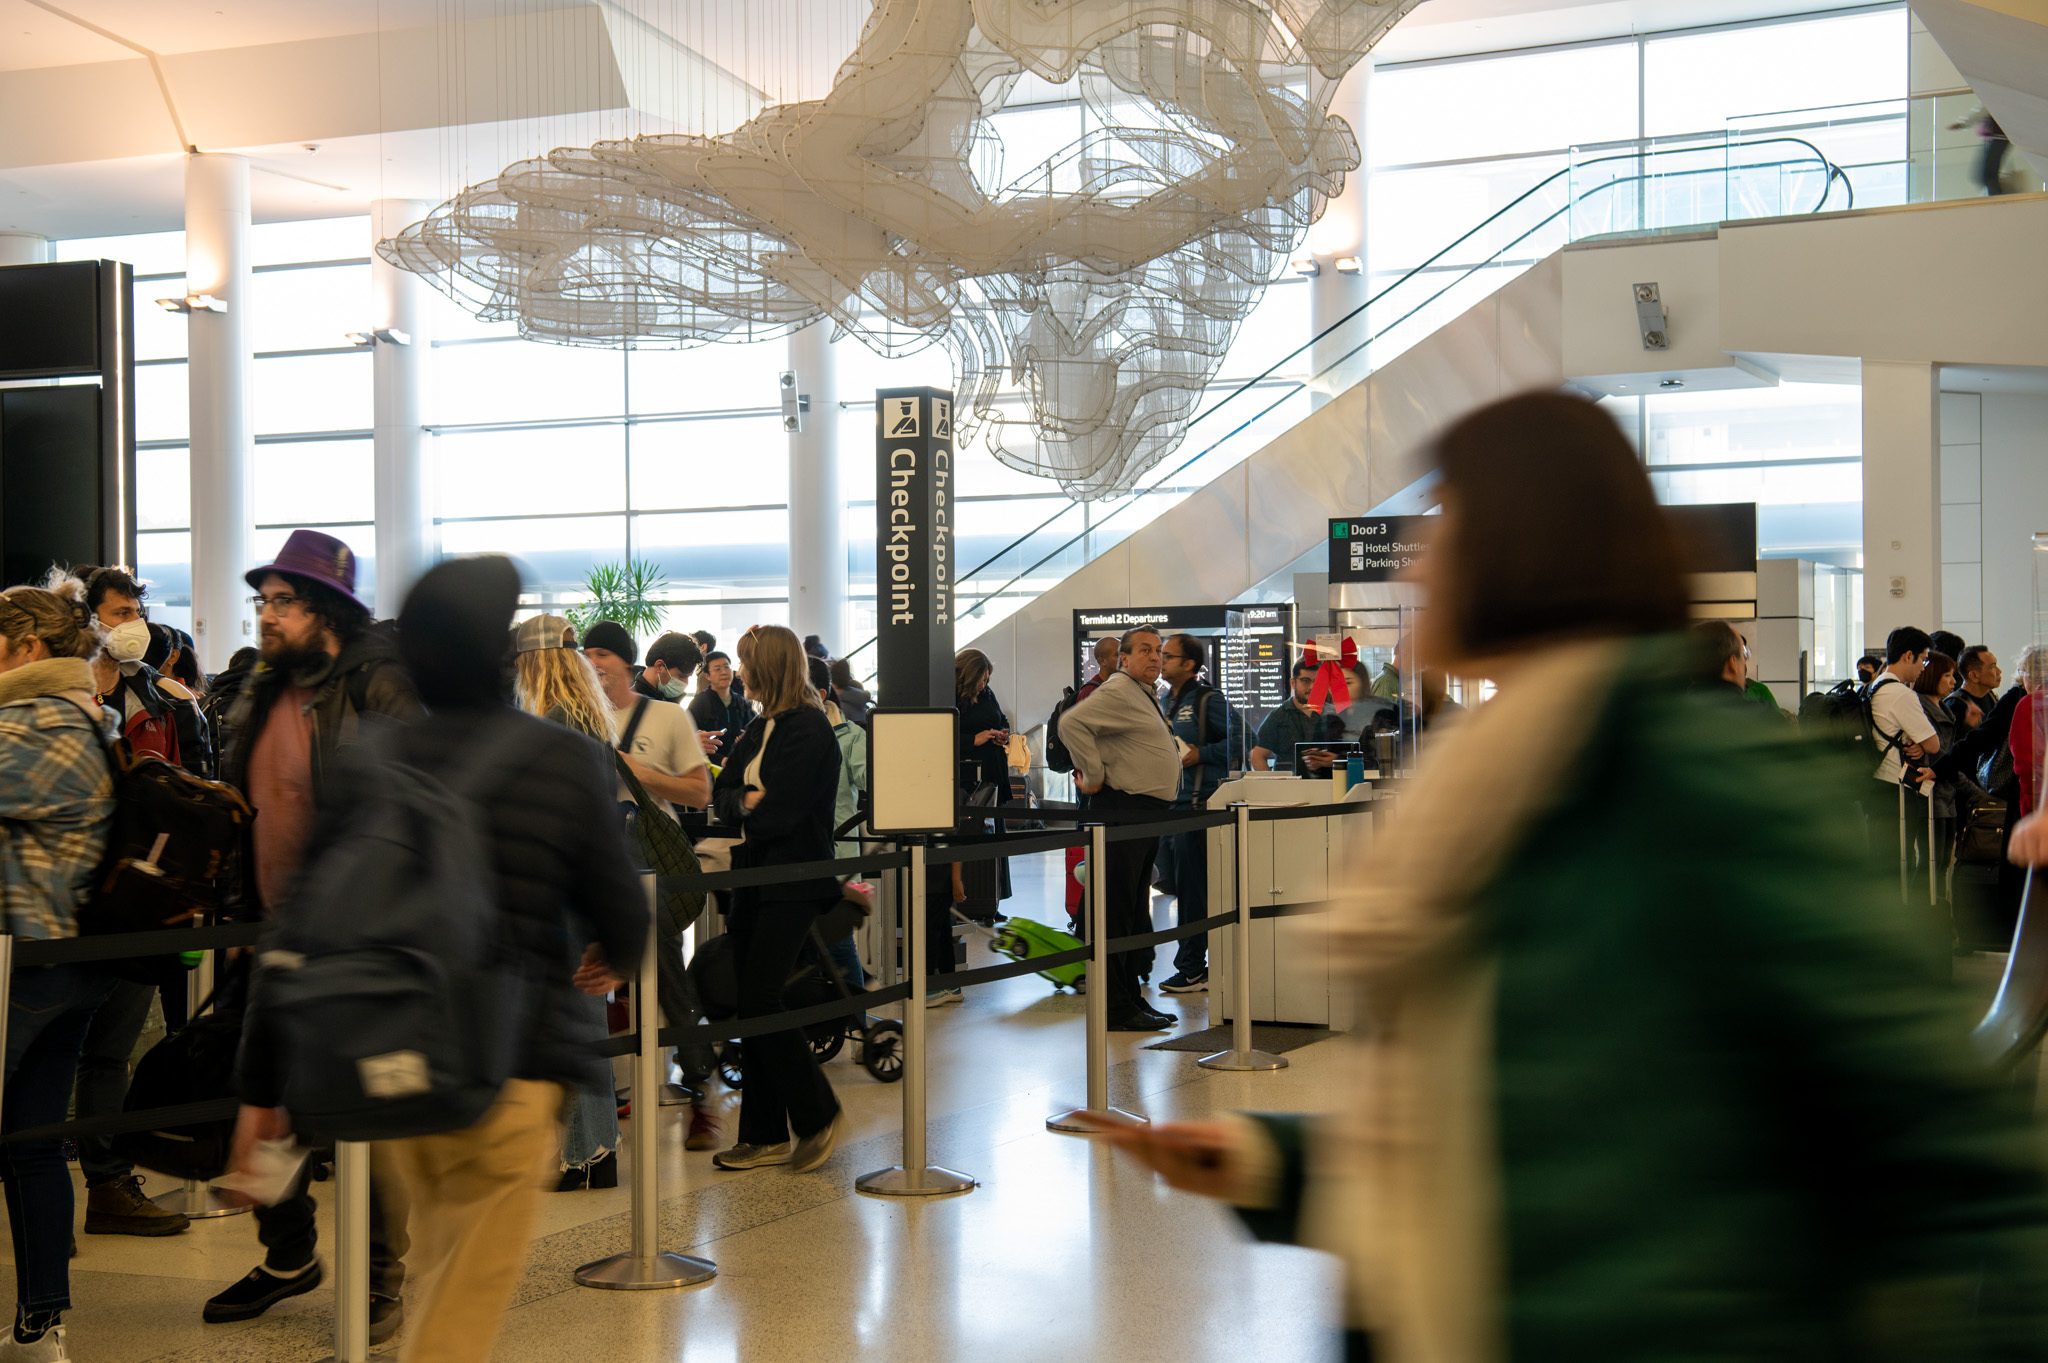 A security checkpoint as people wait in line and TSA agents checking boarding passes and id's.